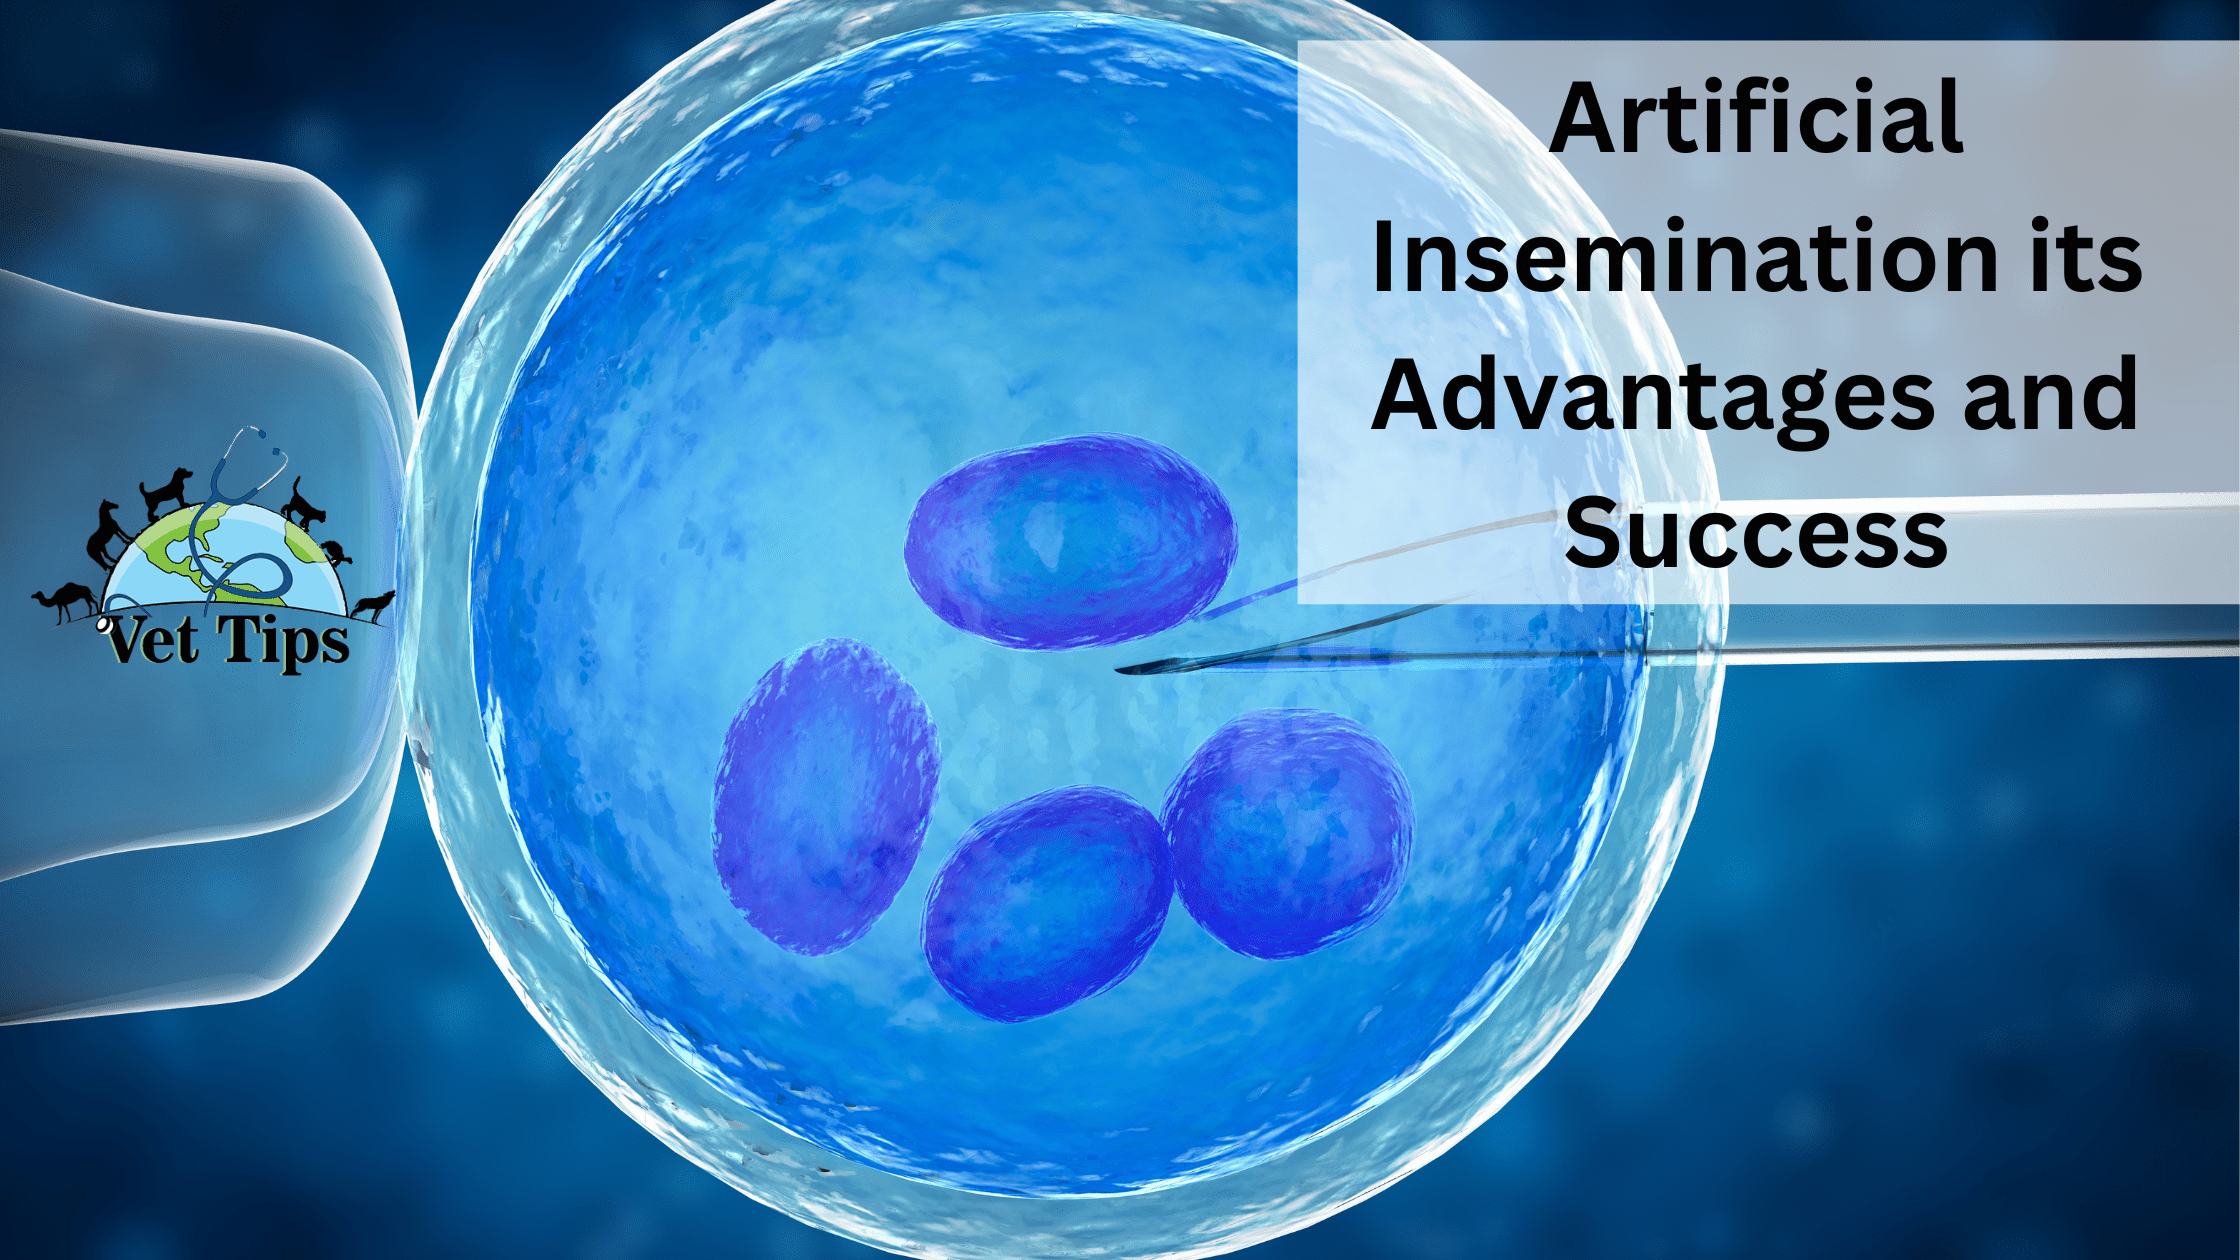 Artificial Insemination its Advantages and Success